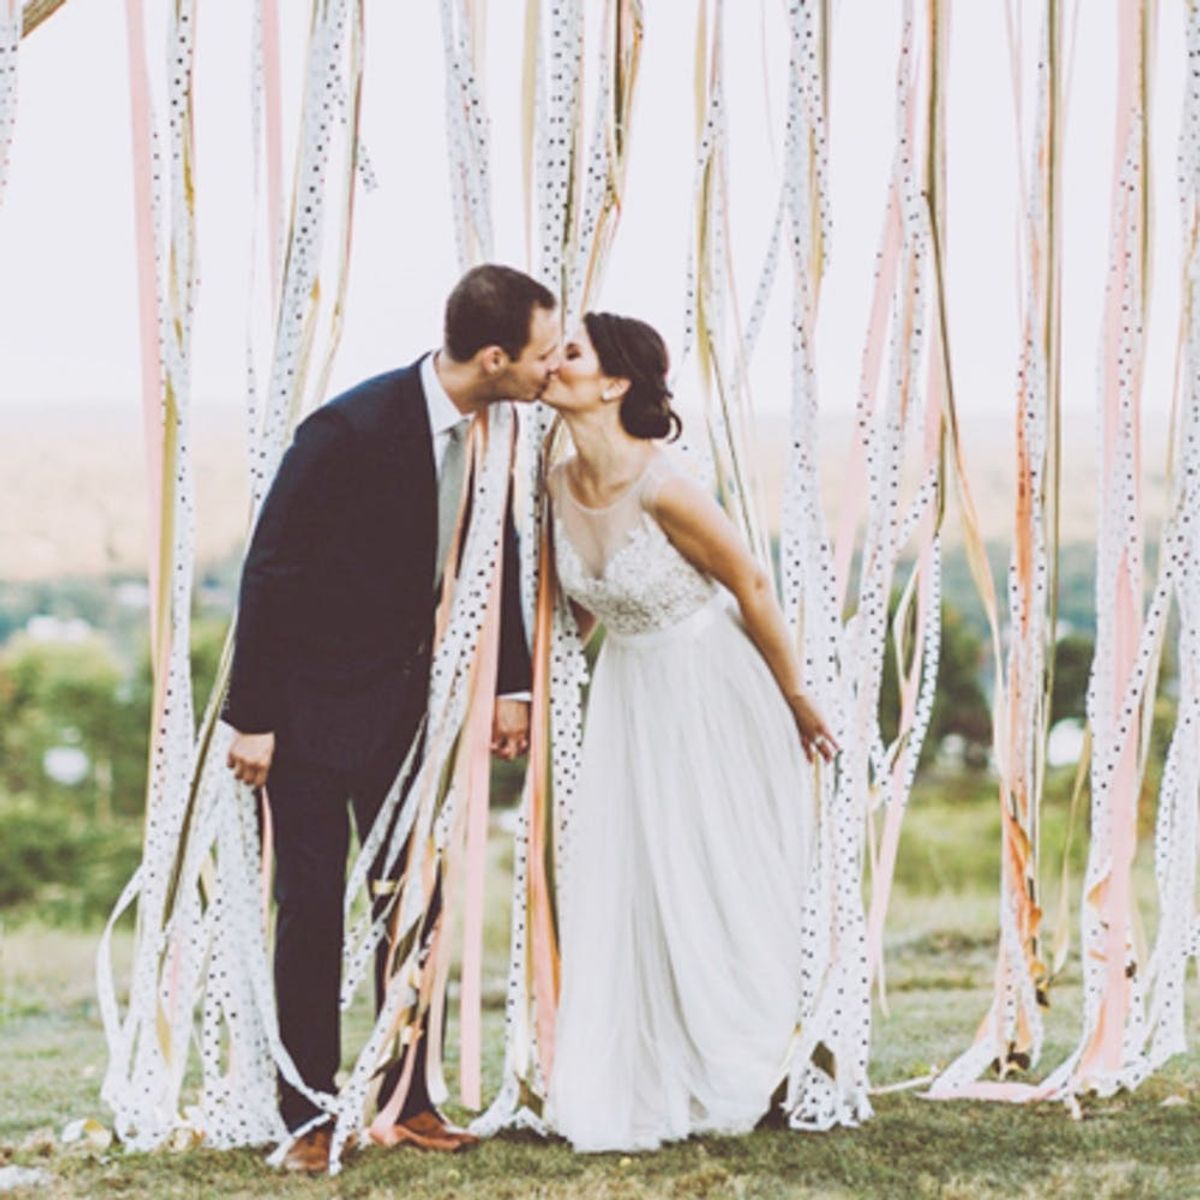 11 Ways to DIY Your Wedding With Flagging Tape